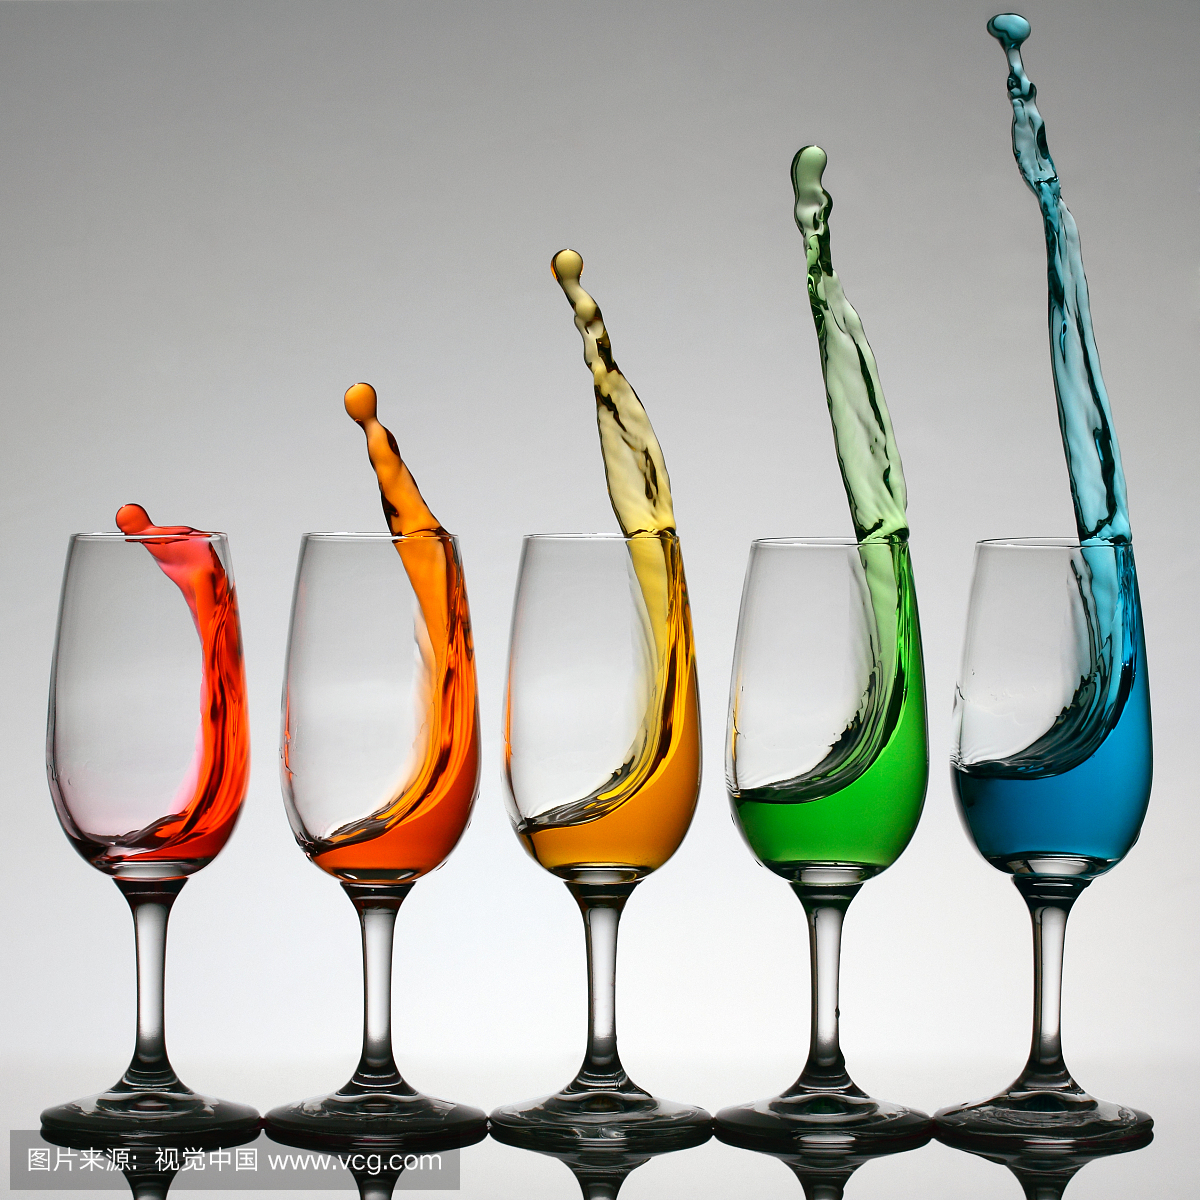 Cheers higher with colorful splashes from wine 